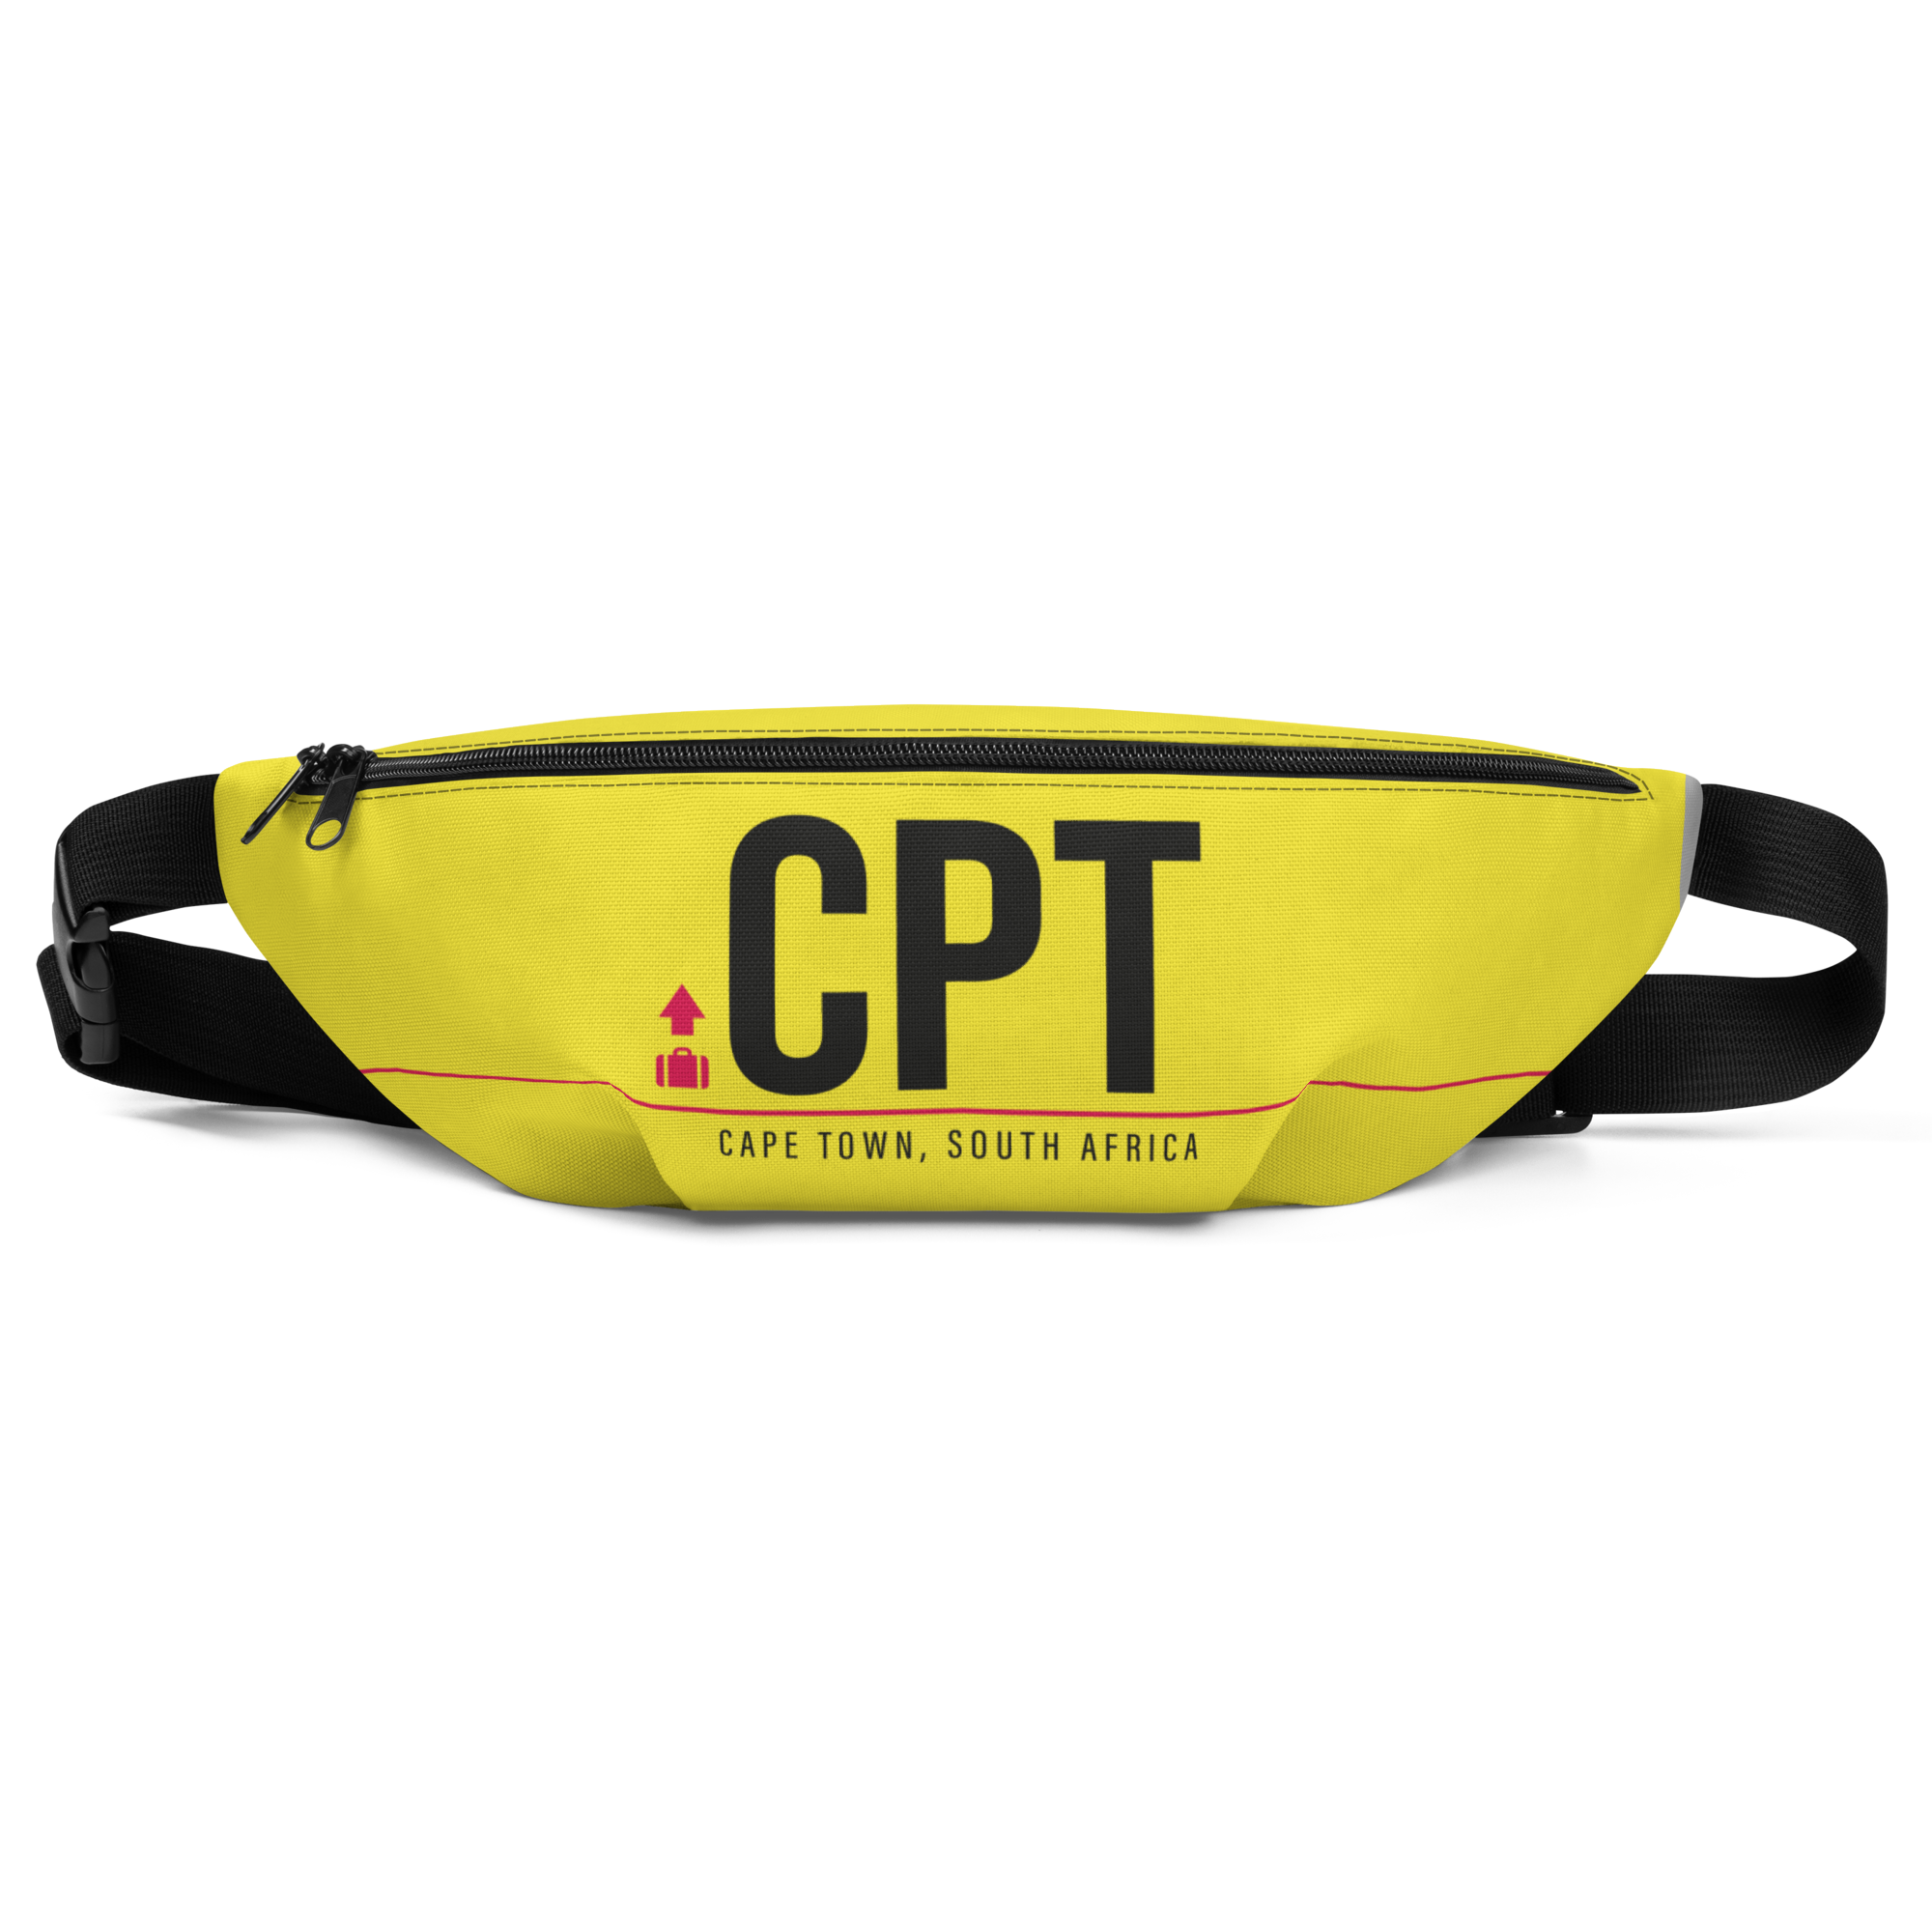 CPT - Cape Town airport code belt pouch